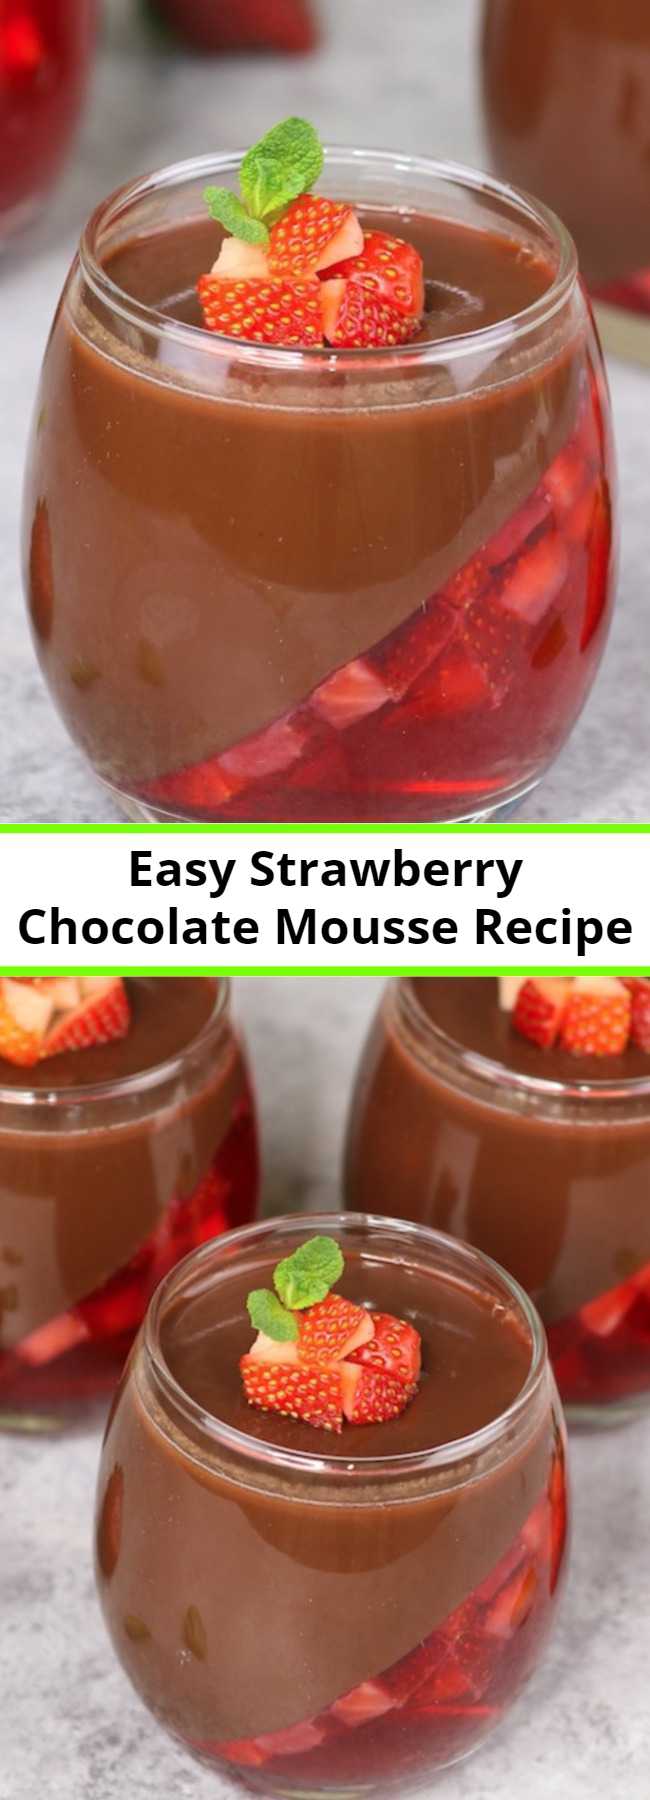 Easy Strawberry Chocolate Mousse Recipe - Strawberry Chocolate Mousse is a delicious make ahead dessert with two layers that you can easily prepare. All you need is a few simple ingredients: fresh strawberries, strawberry jello powder, water, cocoa, sugar, half and half milk and unflavored gelatin. Make this for Valentine's Day, birthdays, Mother's Day, holidays and date night. Make ahead recipe, no bake.